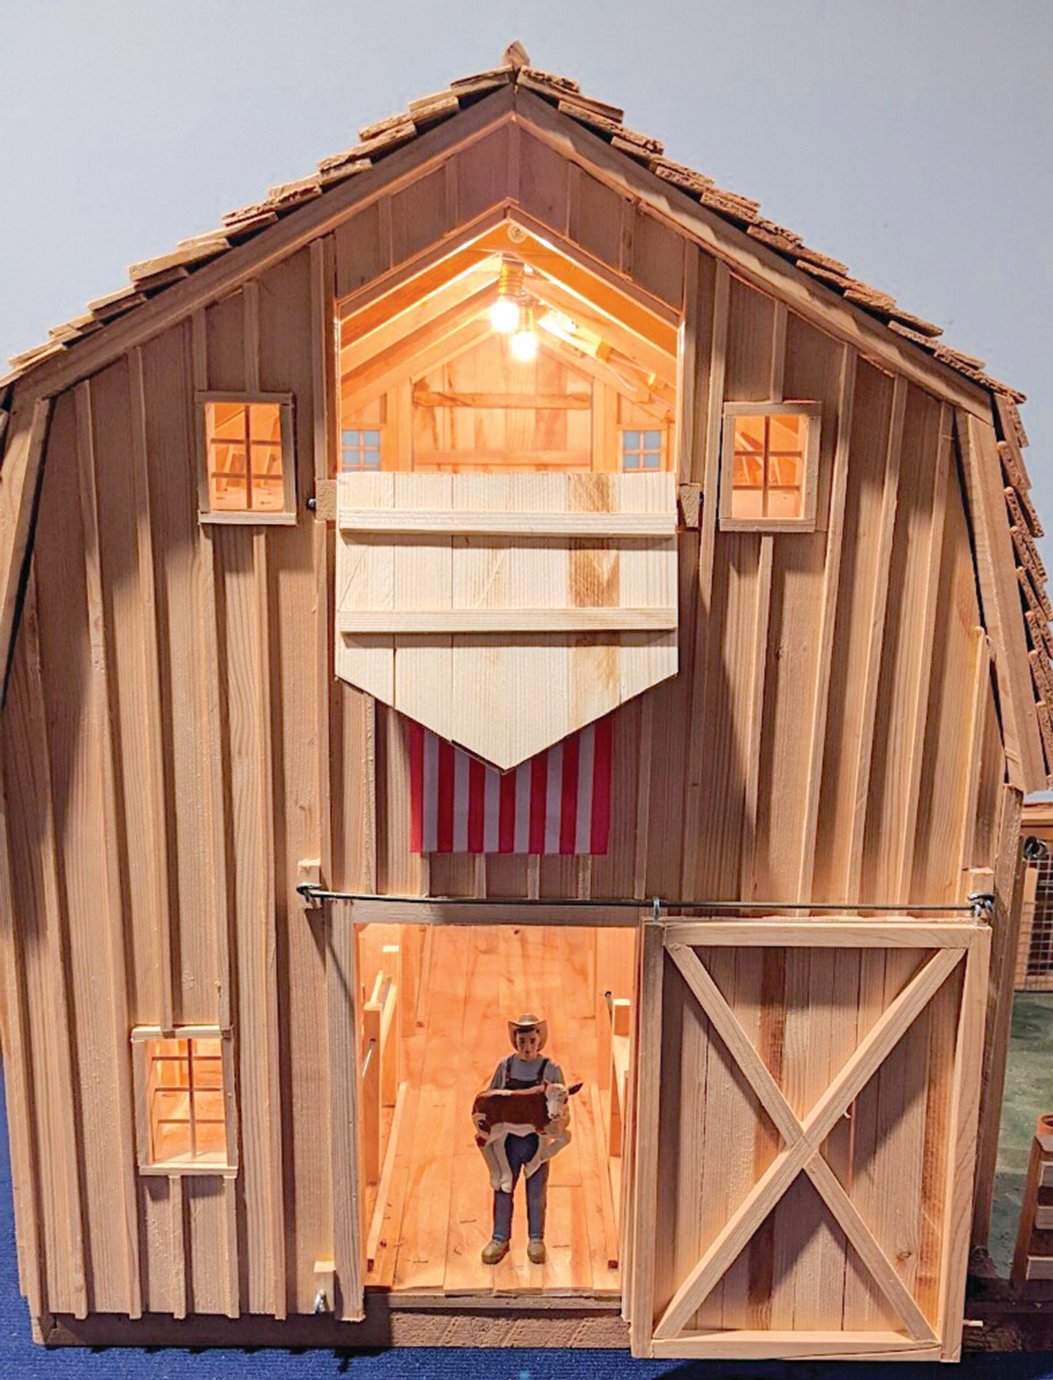 The exterior of a miniature barn built by Richard Peterman depicts scale accuracy.